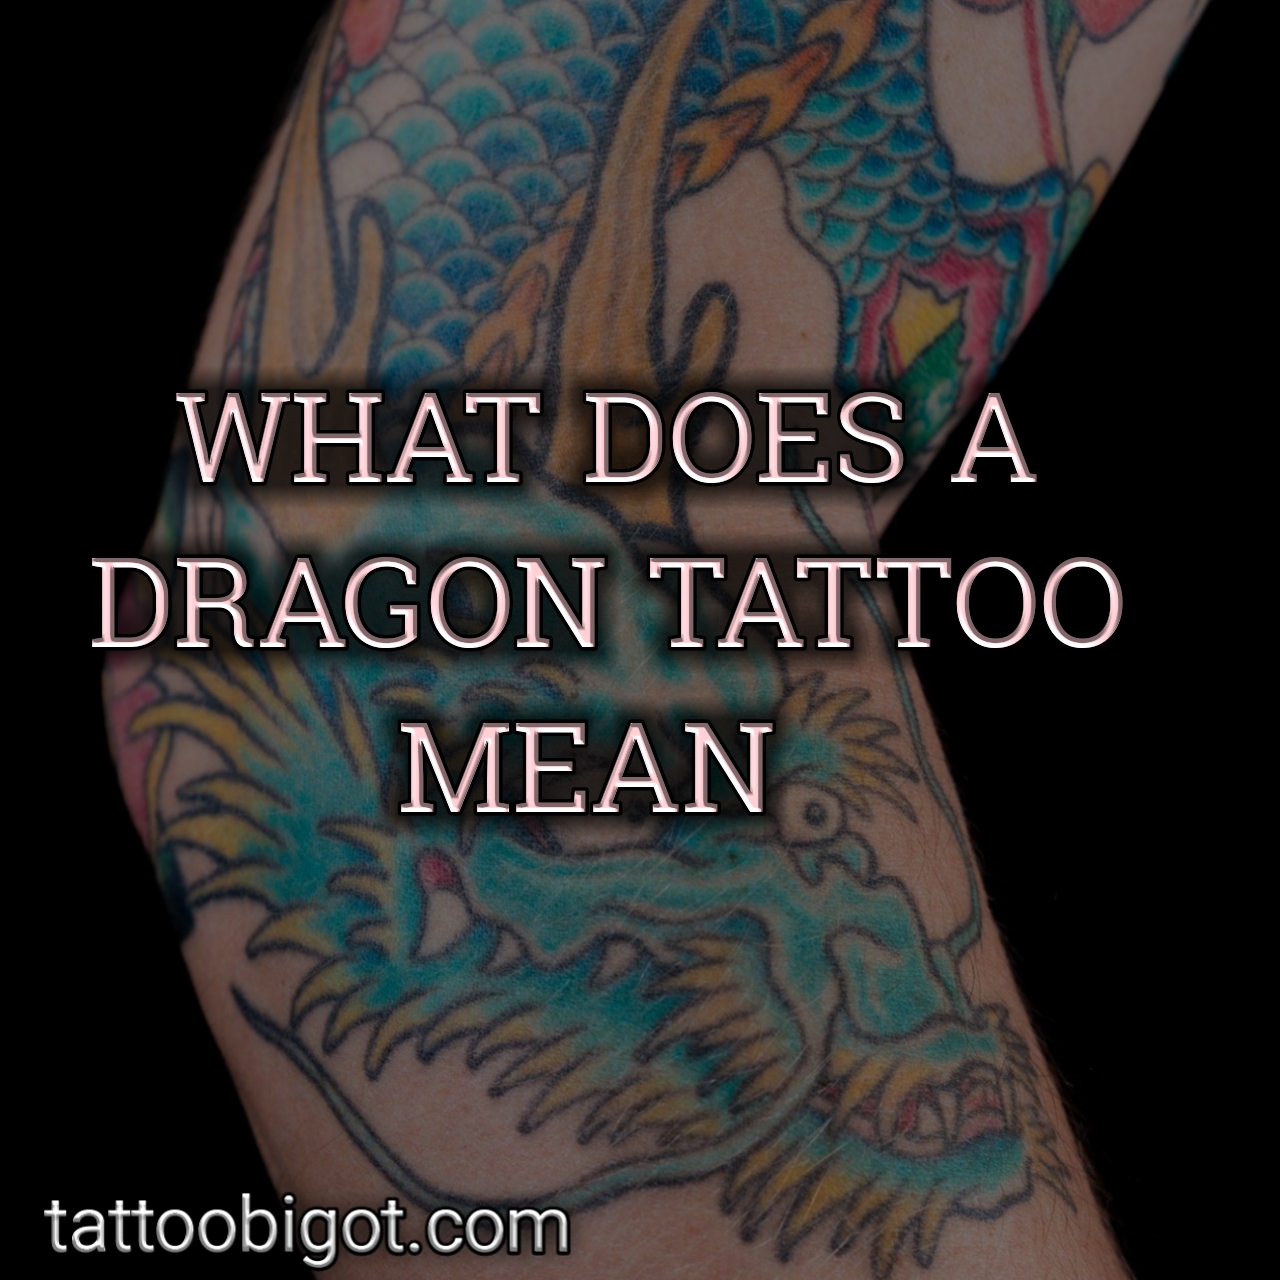 What does a dragon tattoo mean